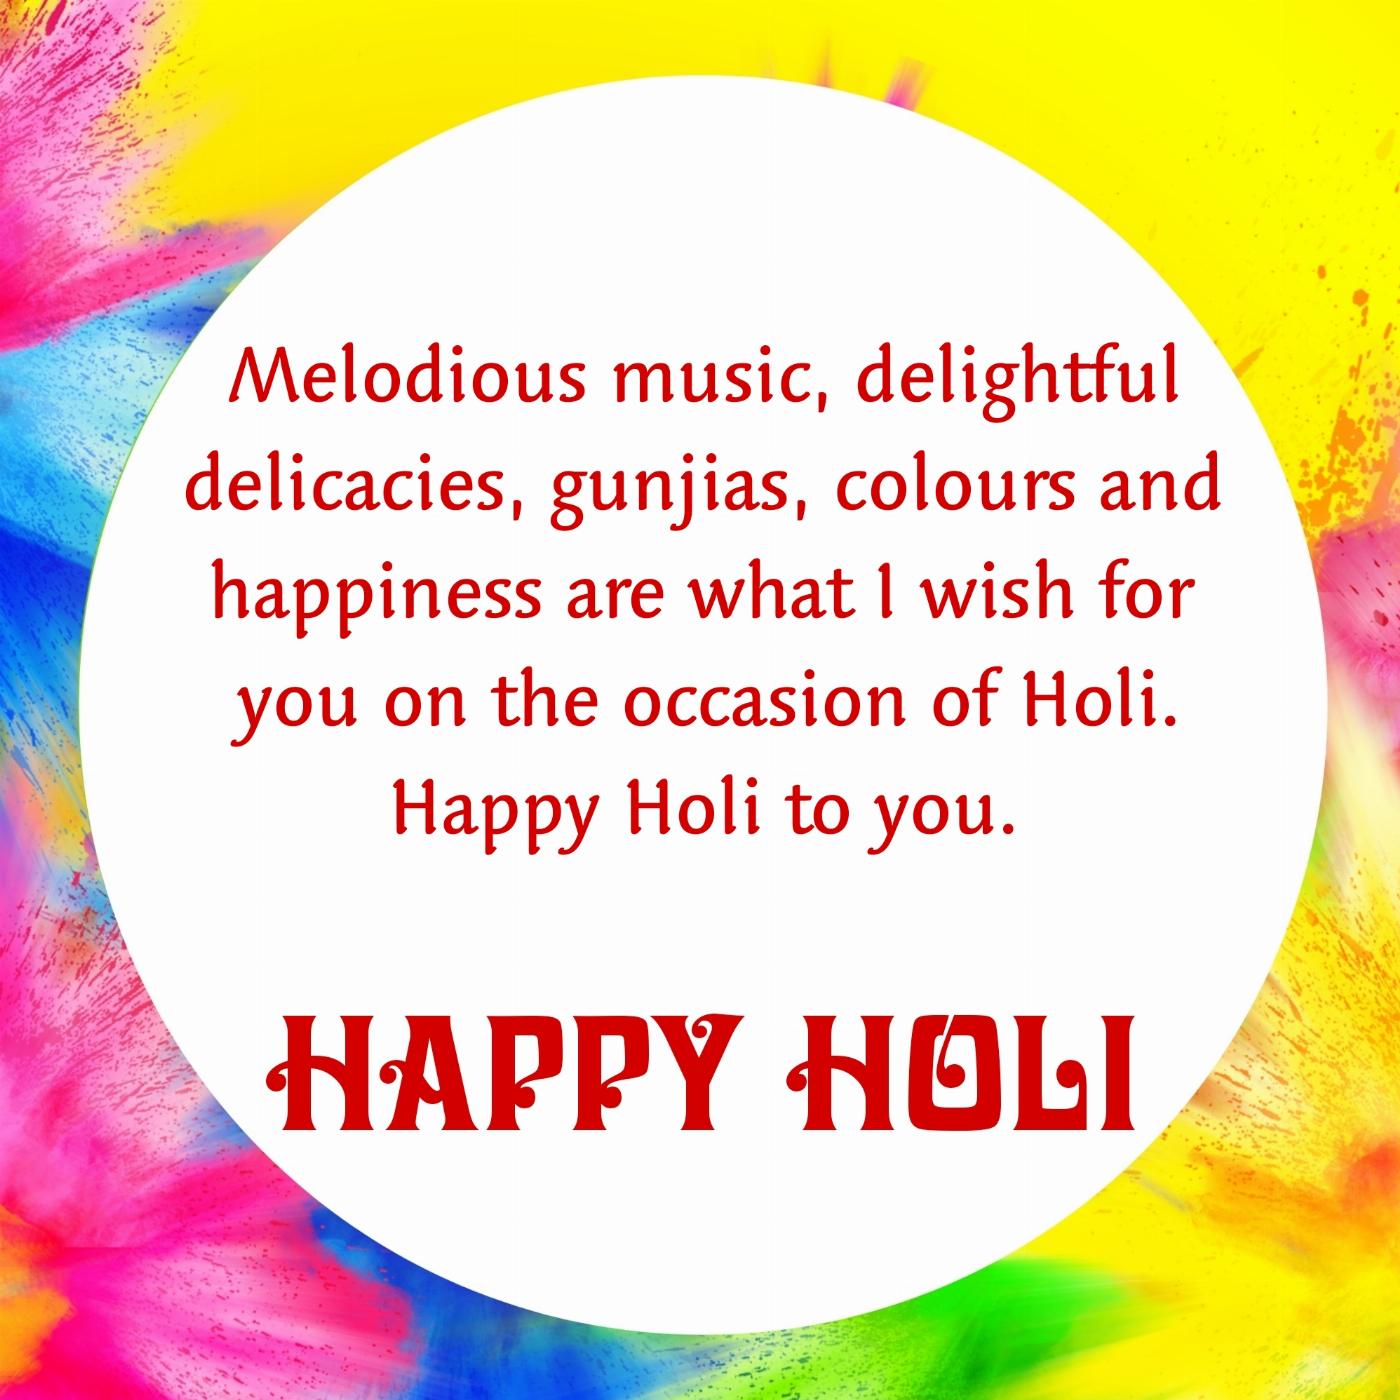 Melodious music delightful delicacies gunjias colours and happiness are what I wish